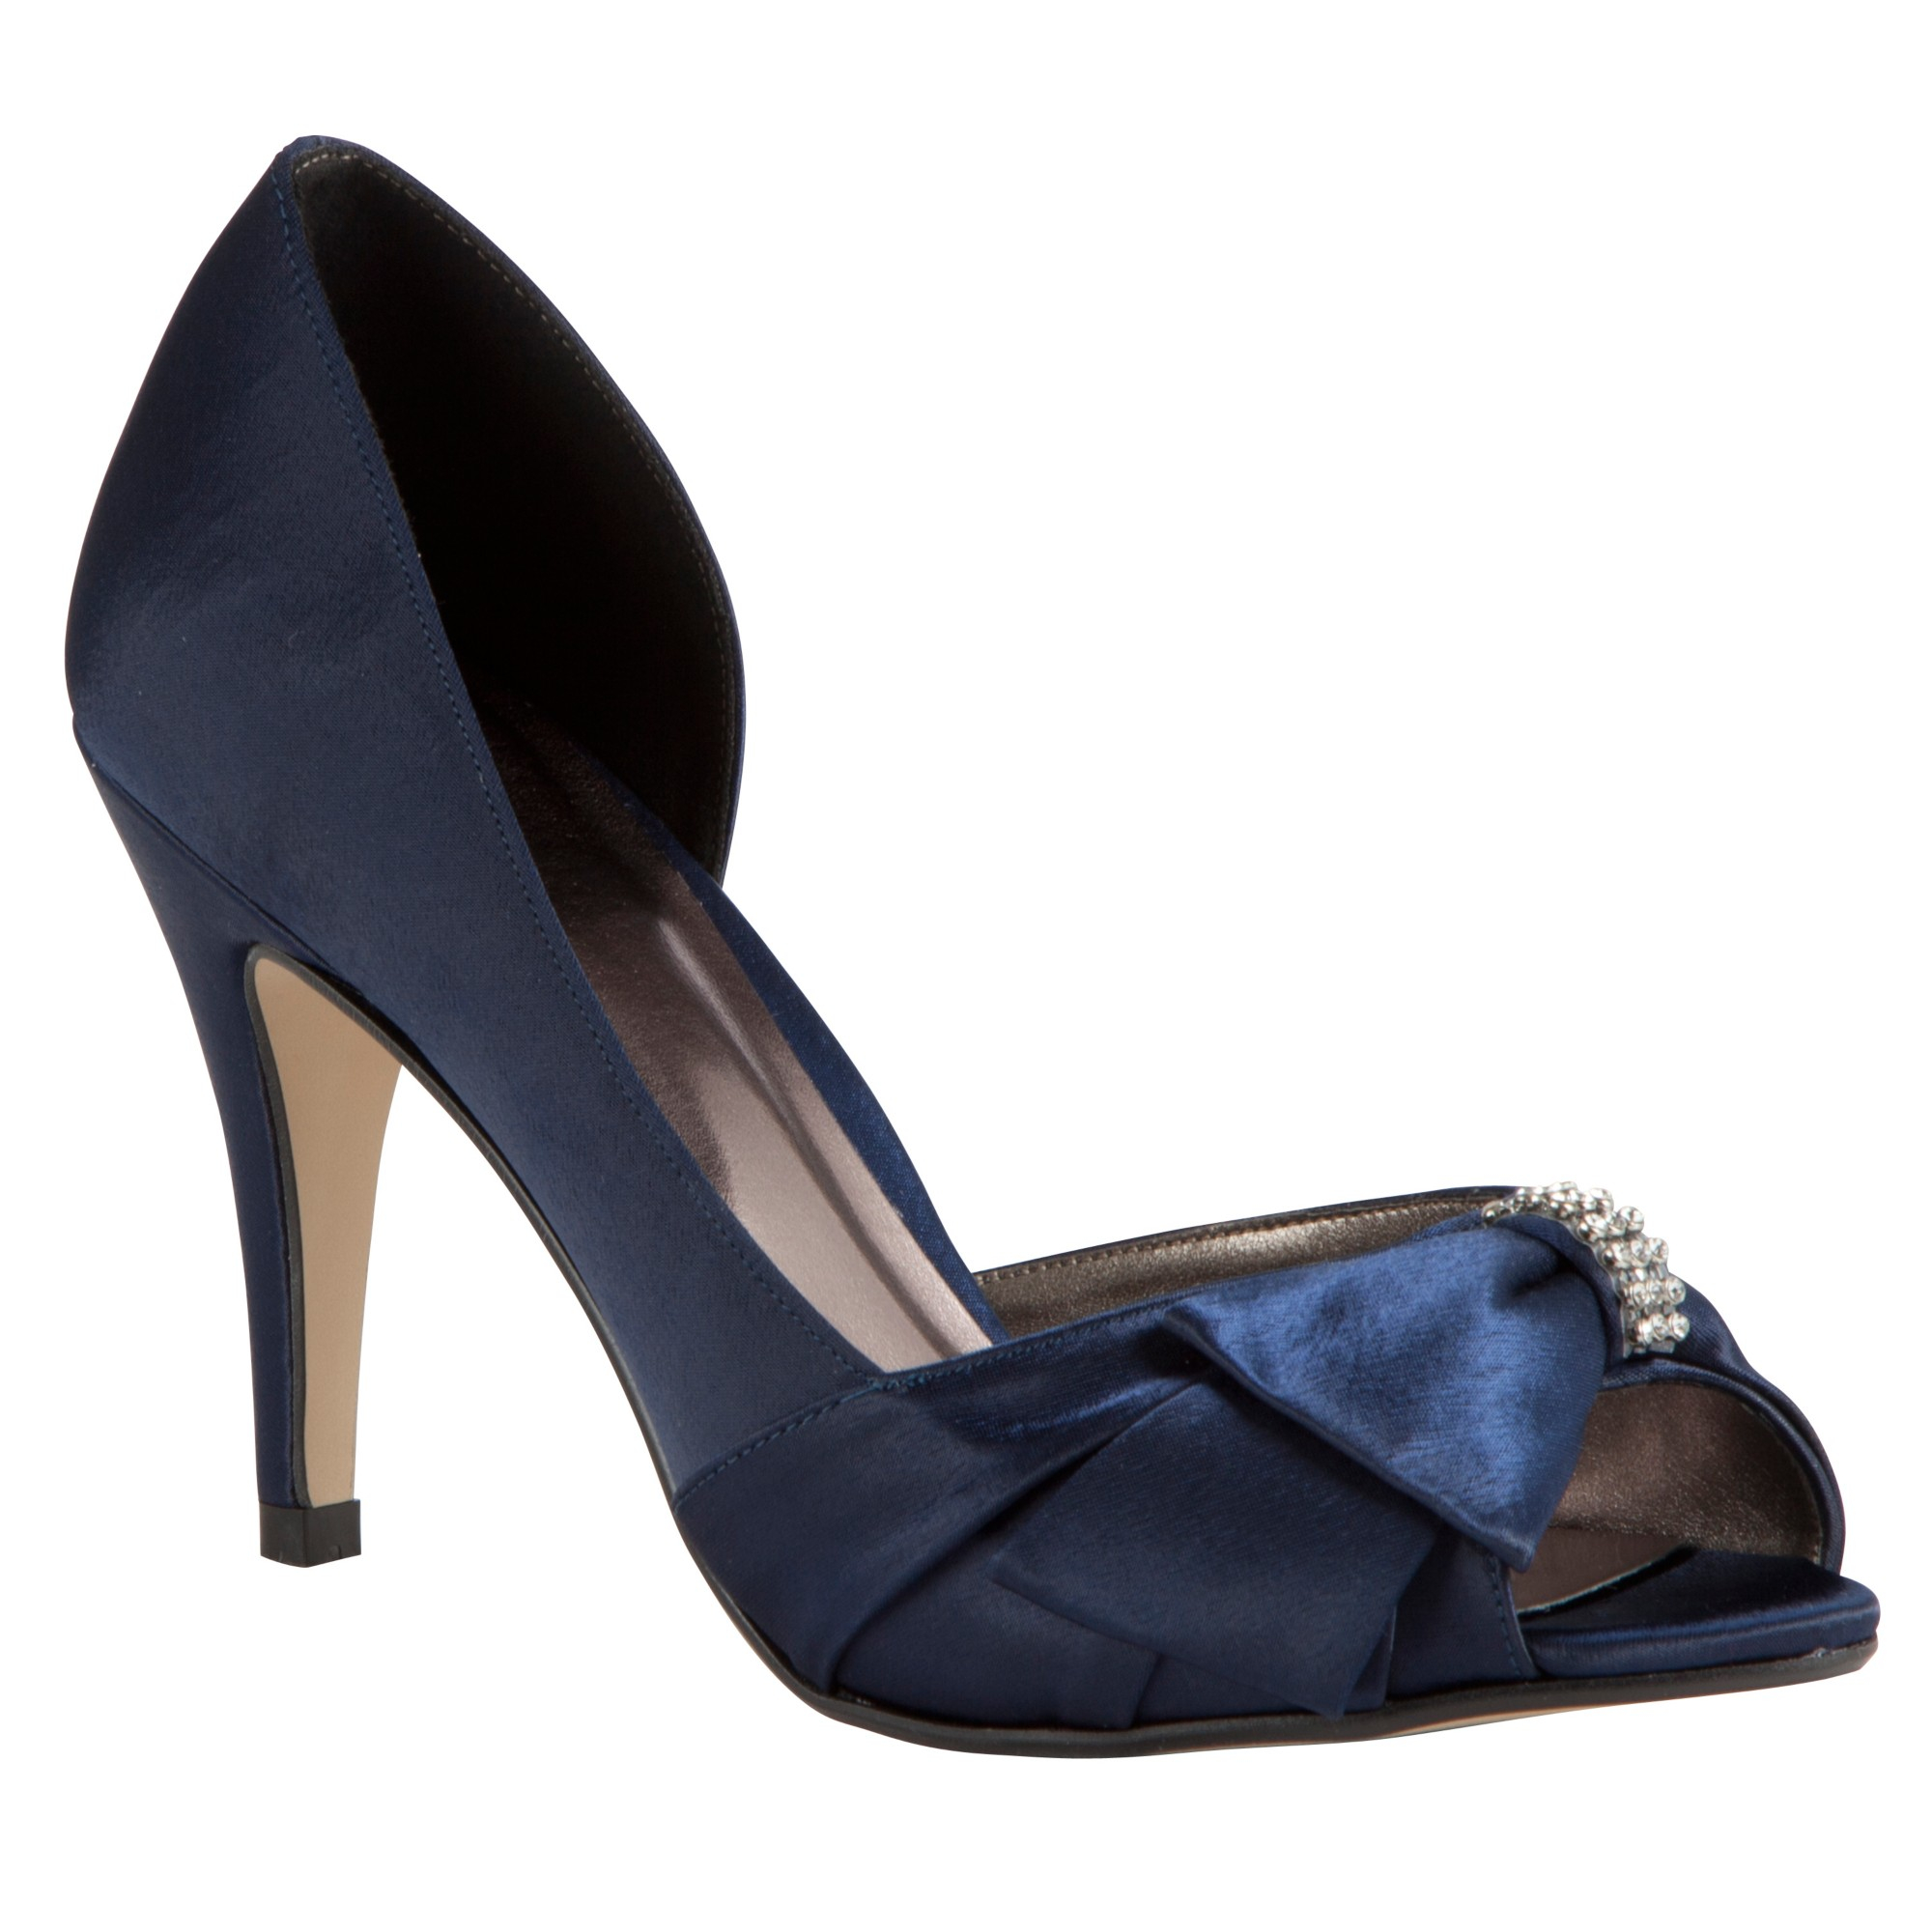 John Lewis Exposed Peep Toe Court Shoes in Blue (Navy) | Lyst